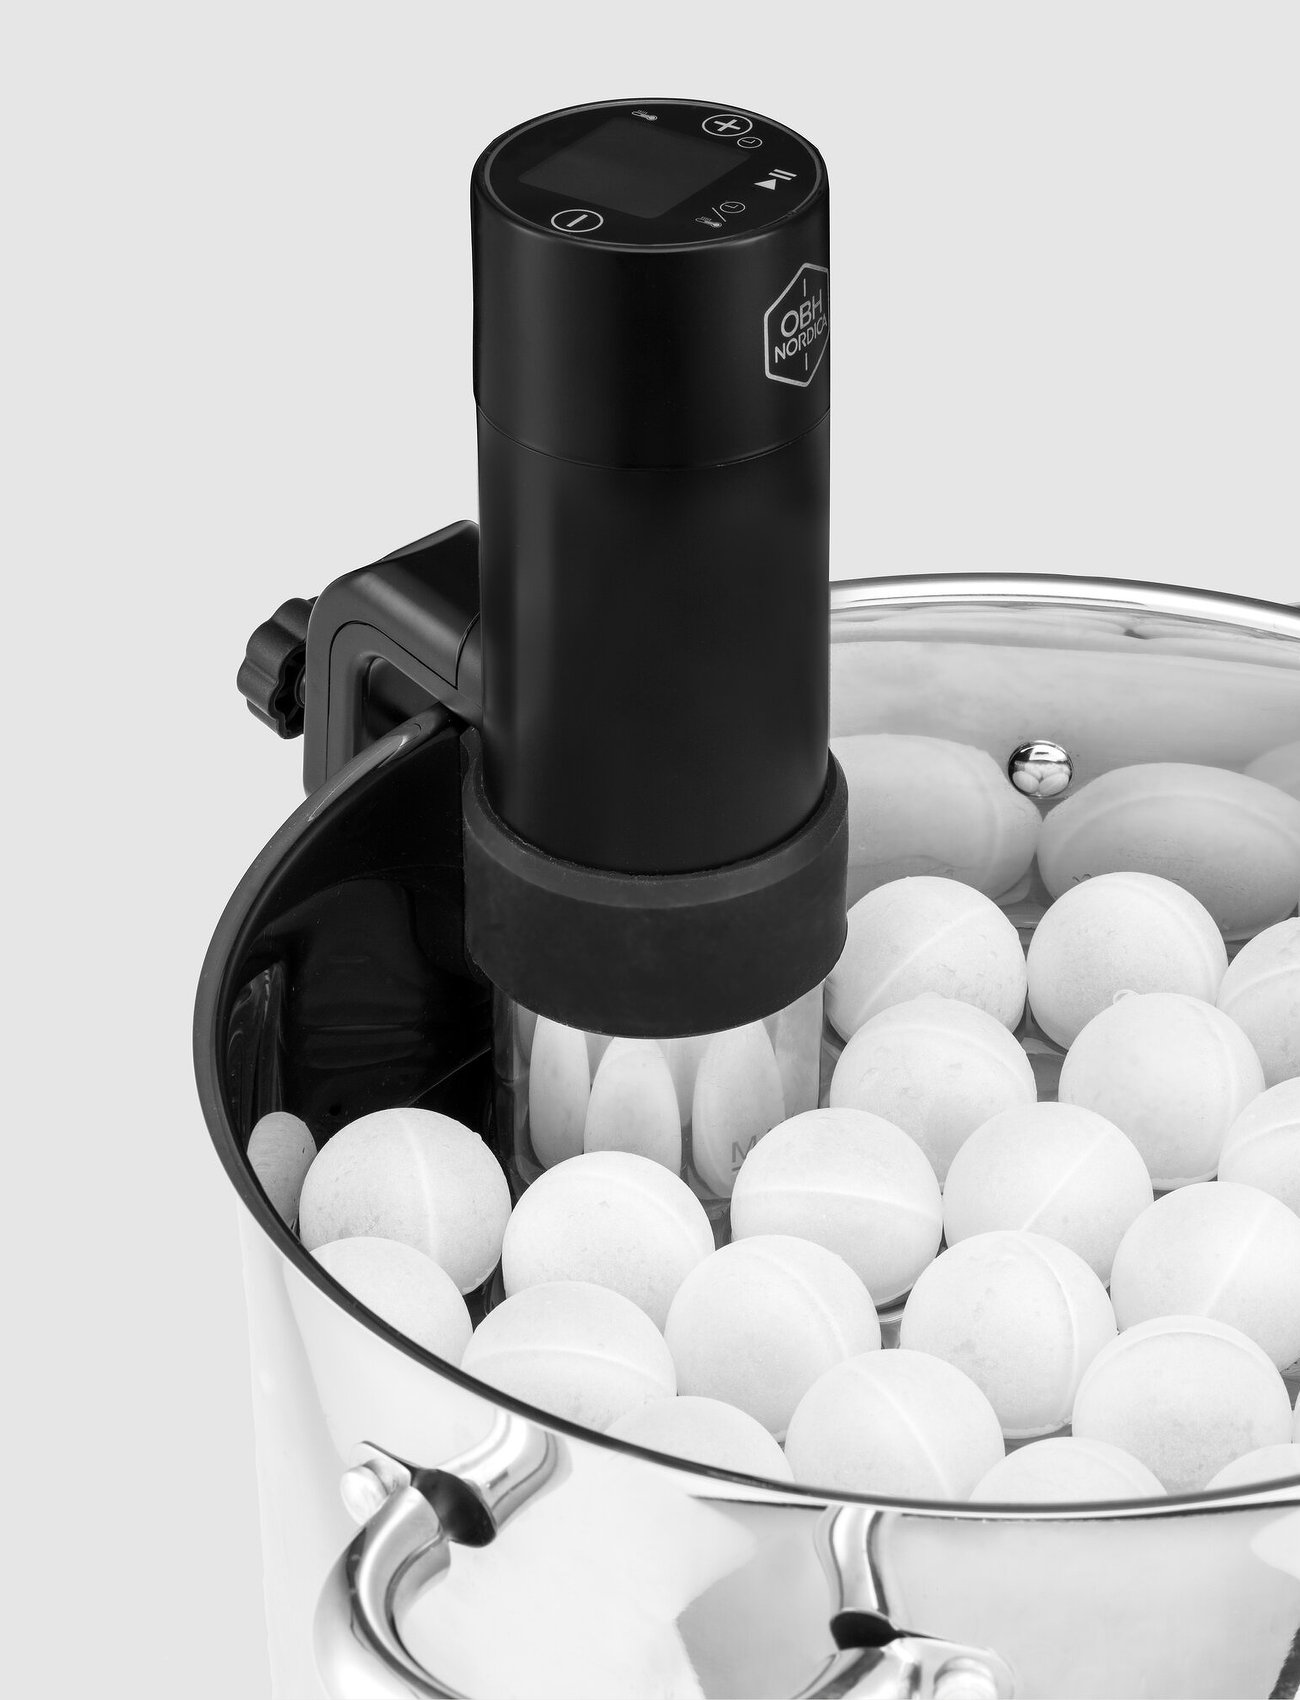 OBH Nordica - Immersion sous vide pro plus sous vide cooker - fødselsdagsgaver - black and stainless steel - 1